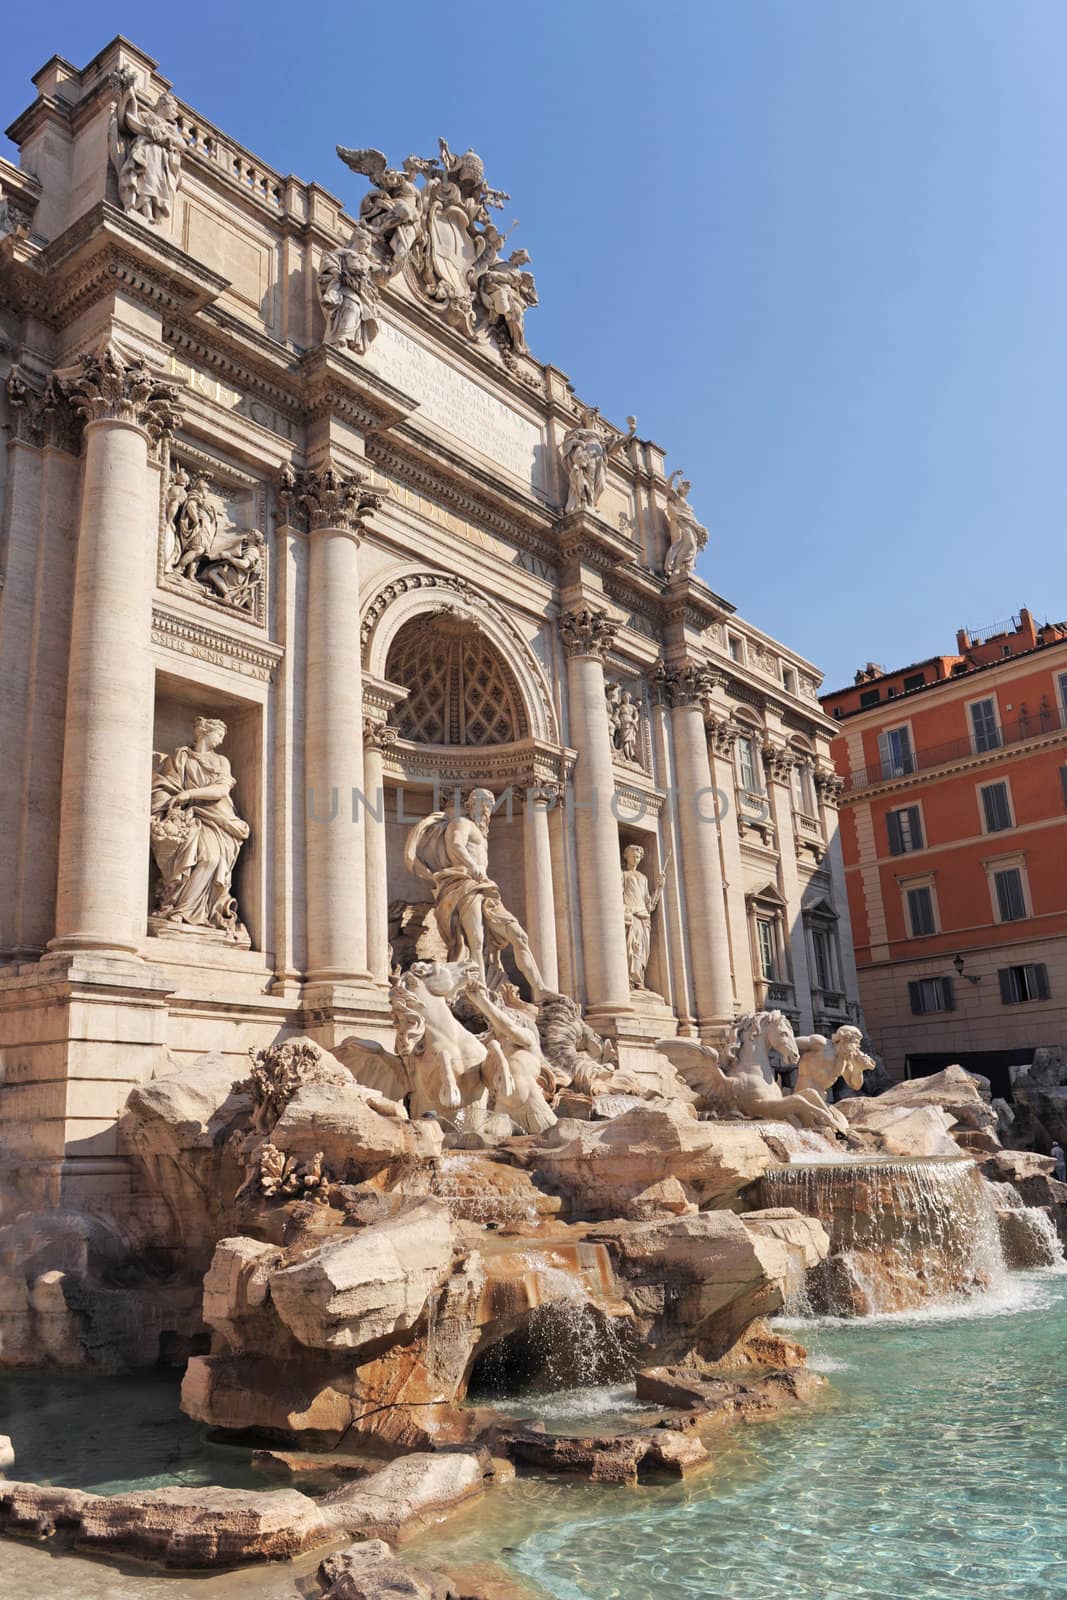 the fontana di Trevi is the largest Baroque fountain in the city and one of the most famous fountains in the world